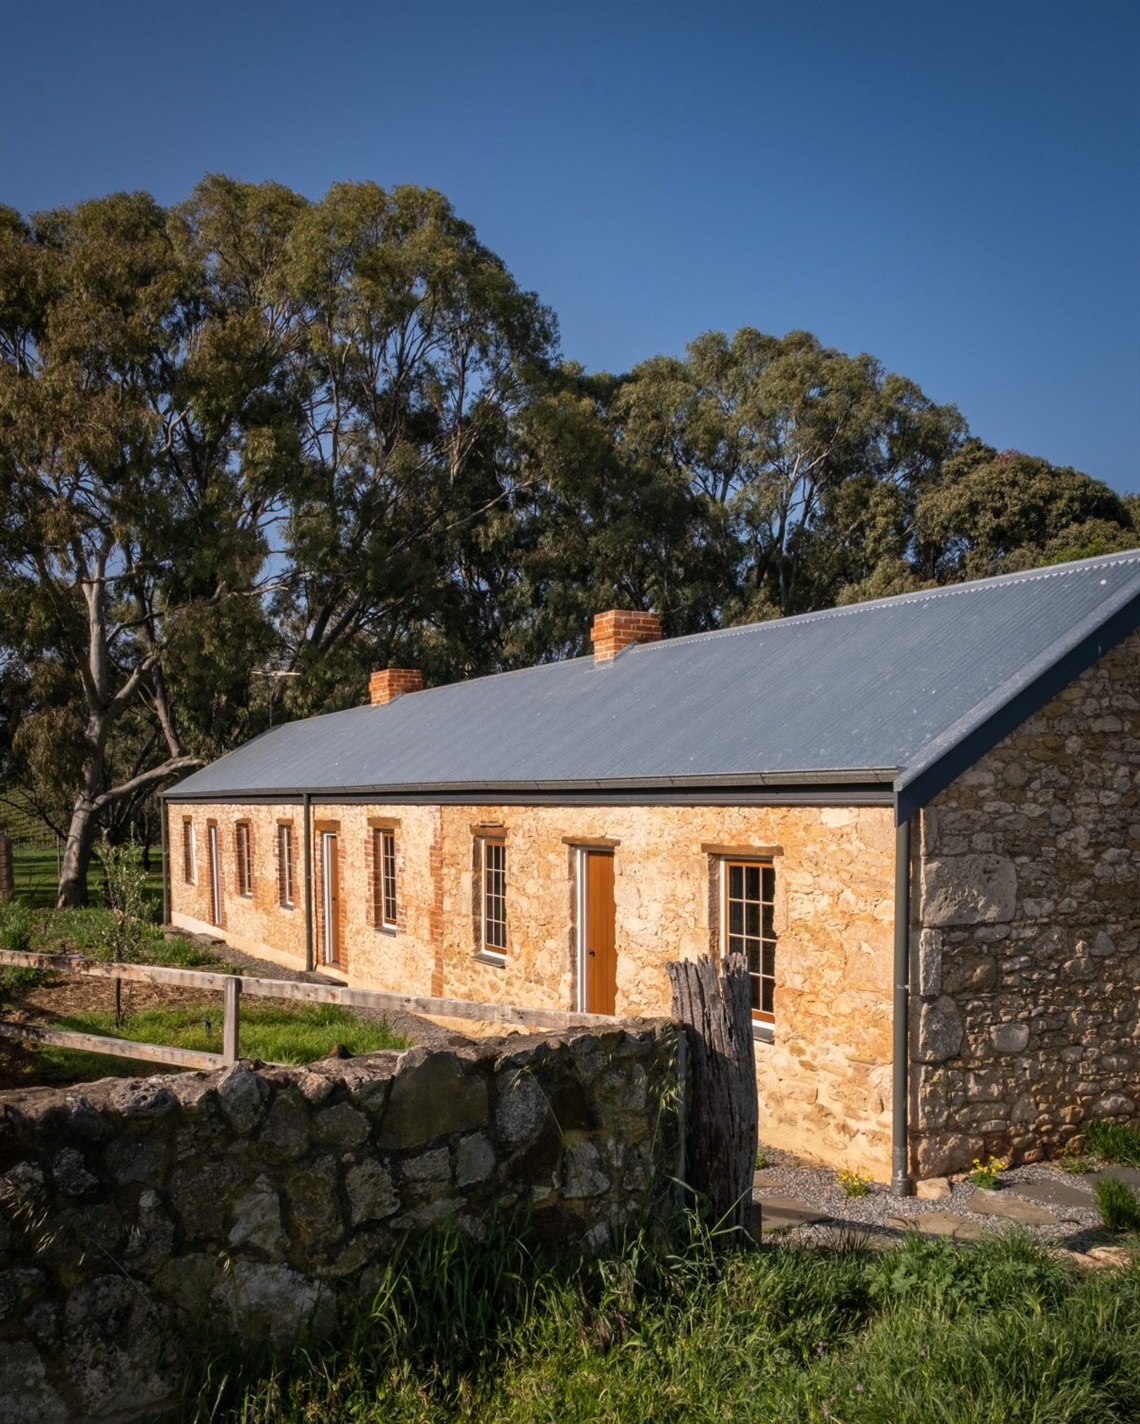 Cottages built for mill workers are now private residences and rental accommodation